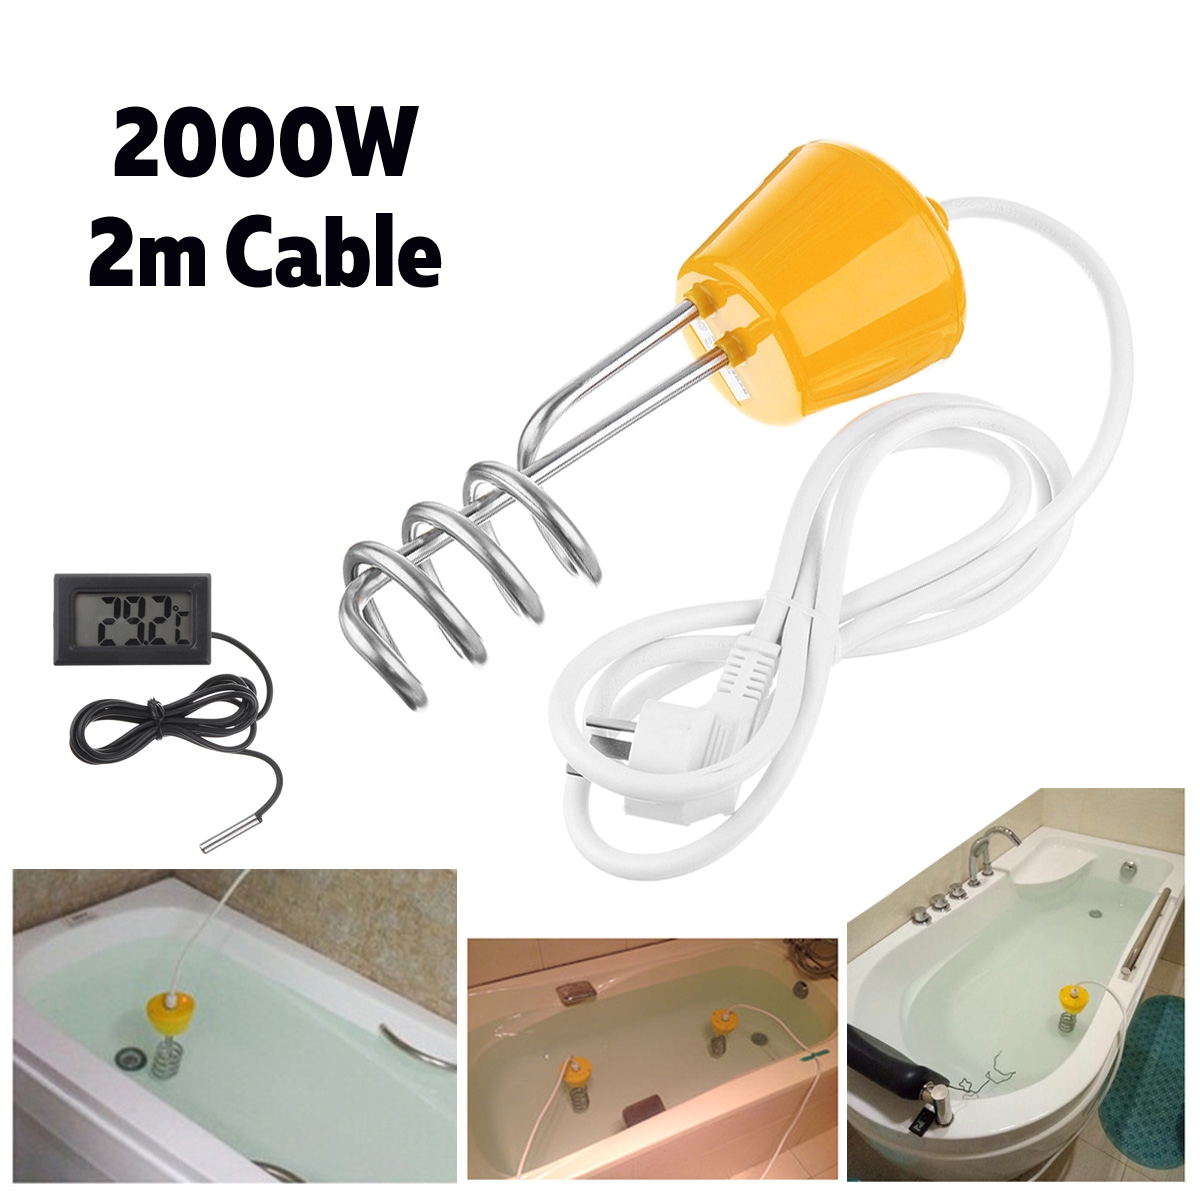 2000w 2m portable suspension electric immersion water heater element boiler for inflatable pool tub travel camping